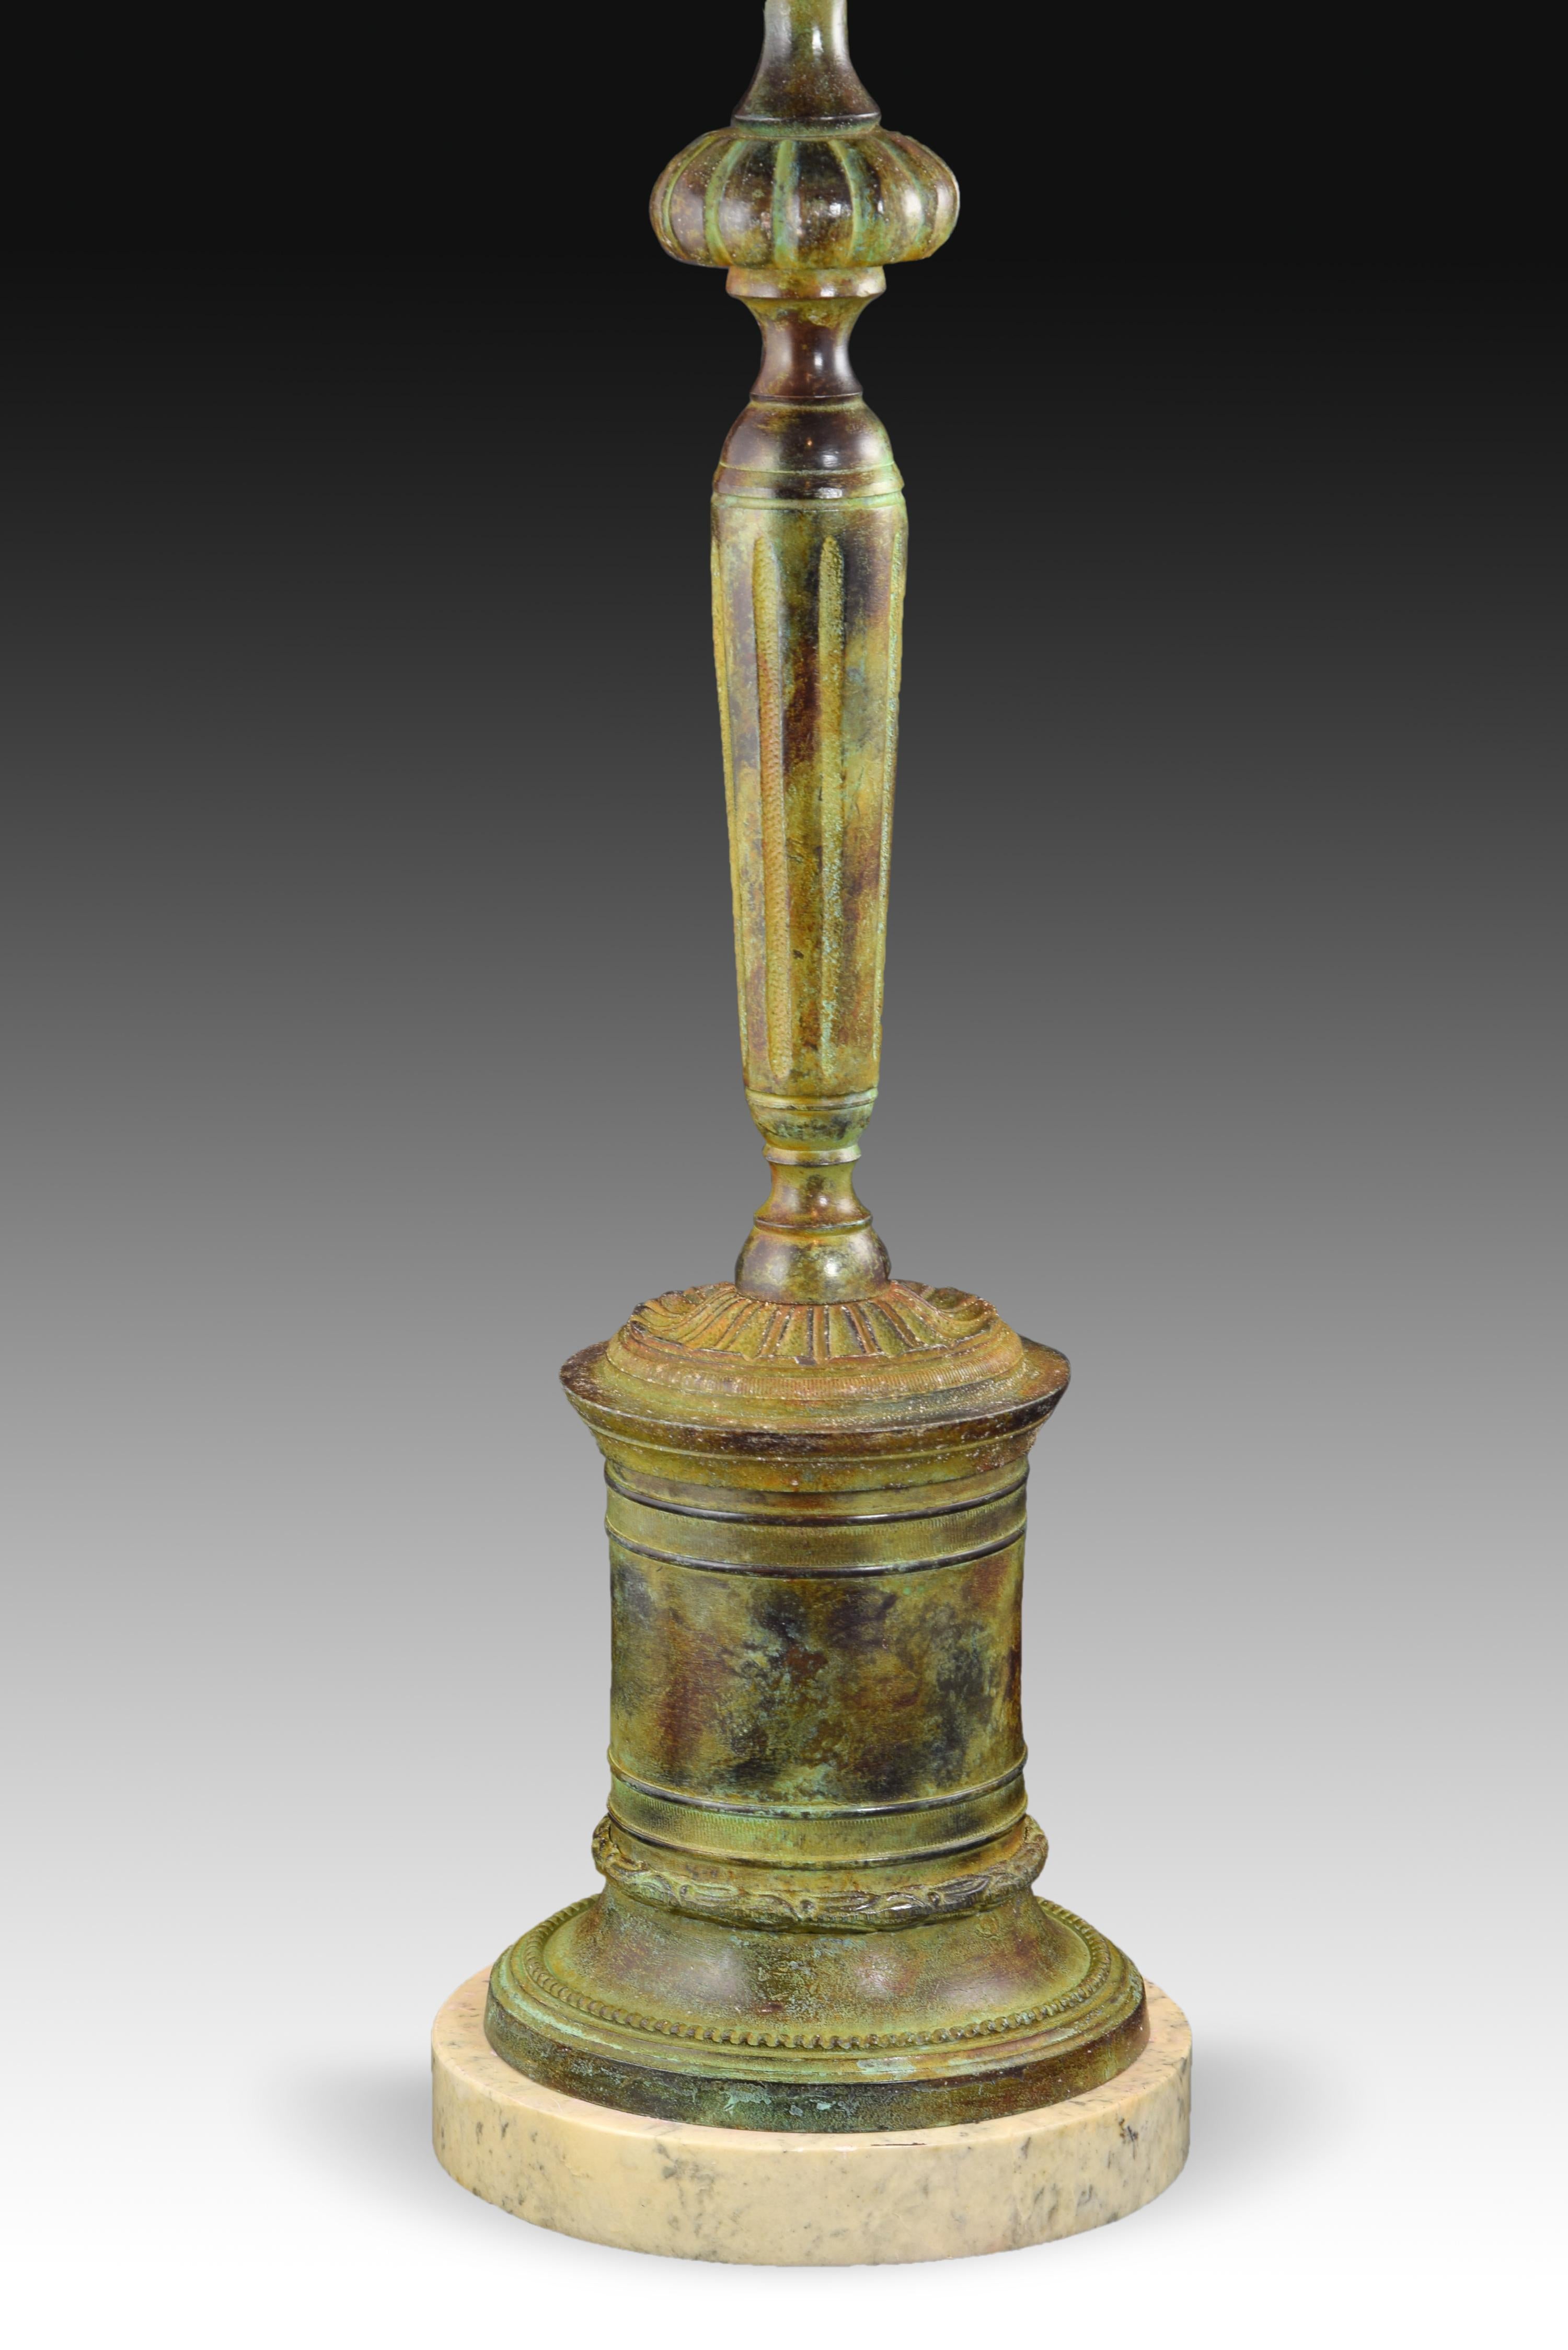 European Candlestick Shaped Lamp, Patinated Bronze, Marble Base